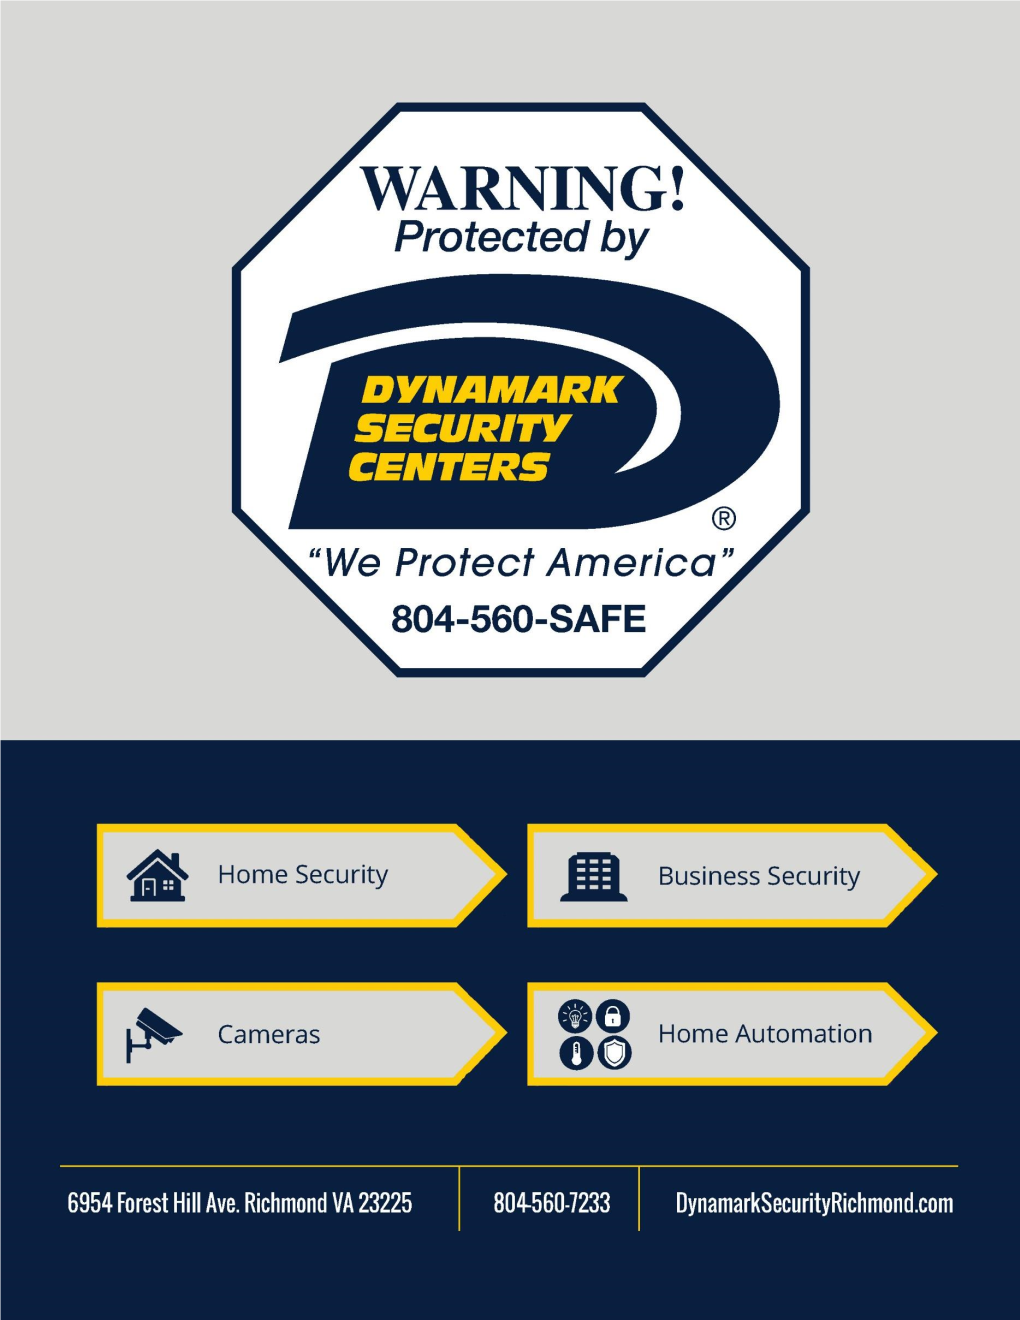 Dynamark Security of Richmond: the Best of Both Worlds